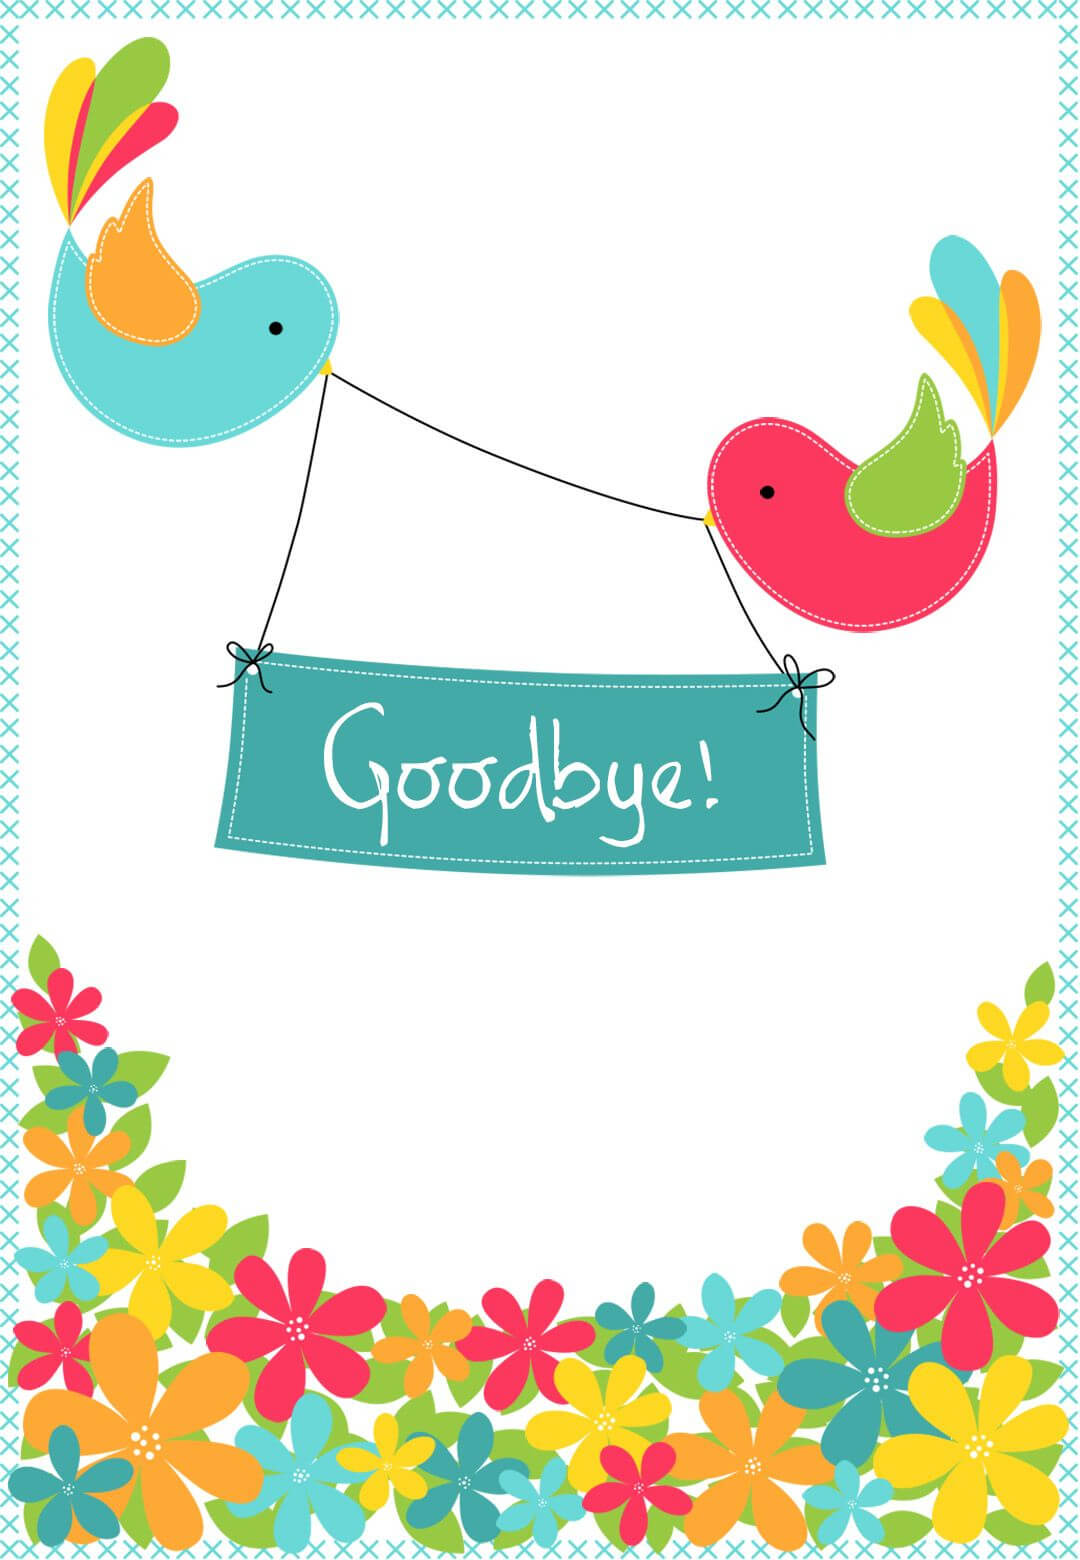 Goodbye From Your Colleagues – Free Good Luck Card Throughout Goodbye Card Template